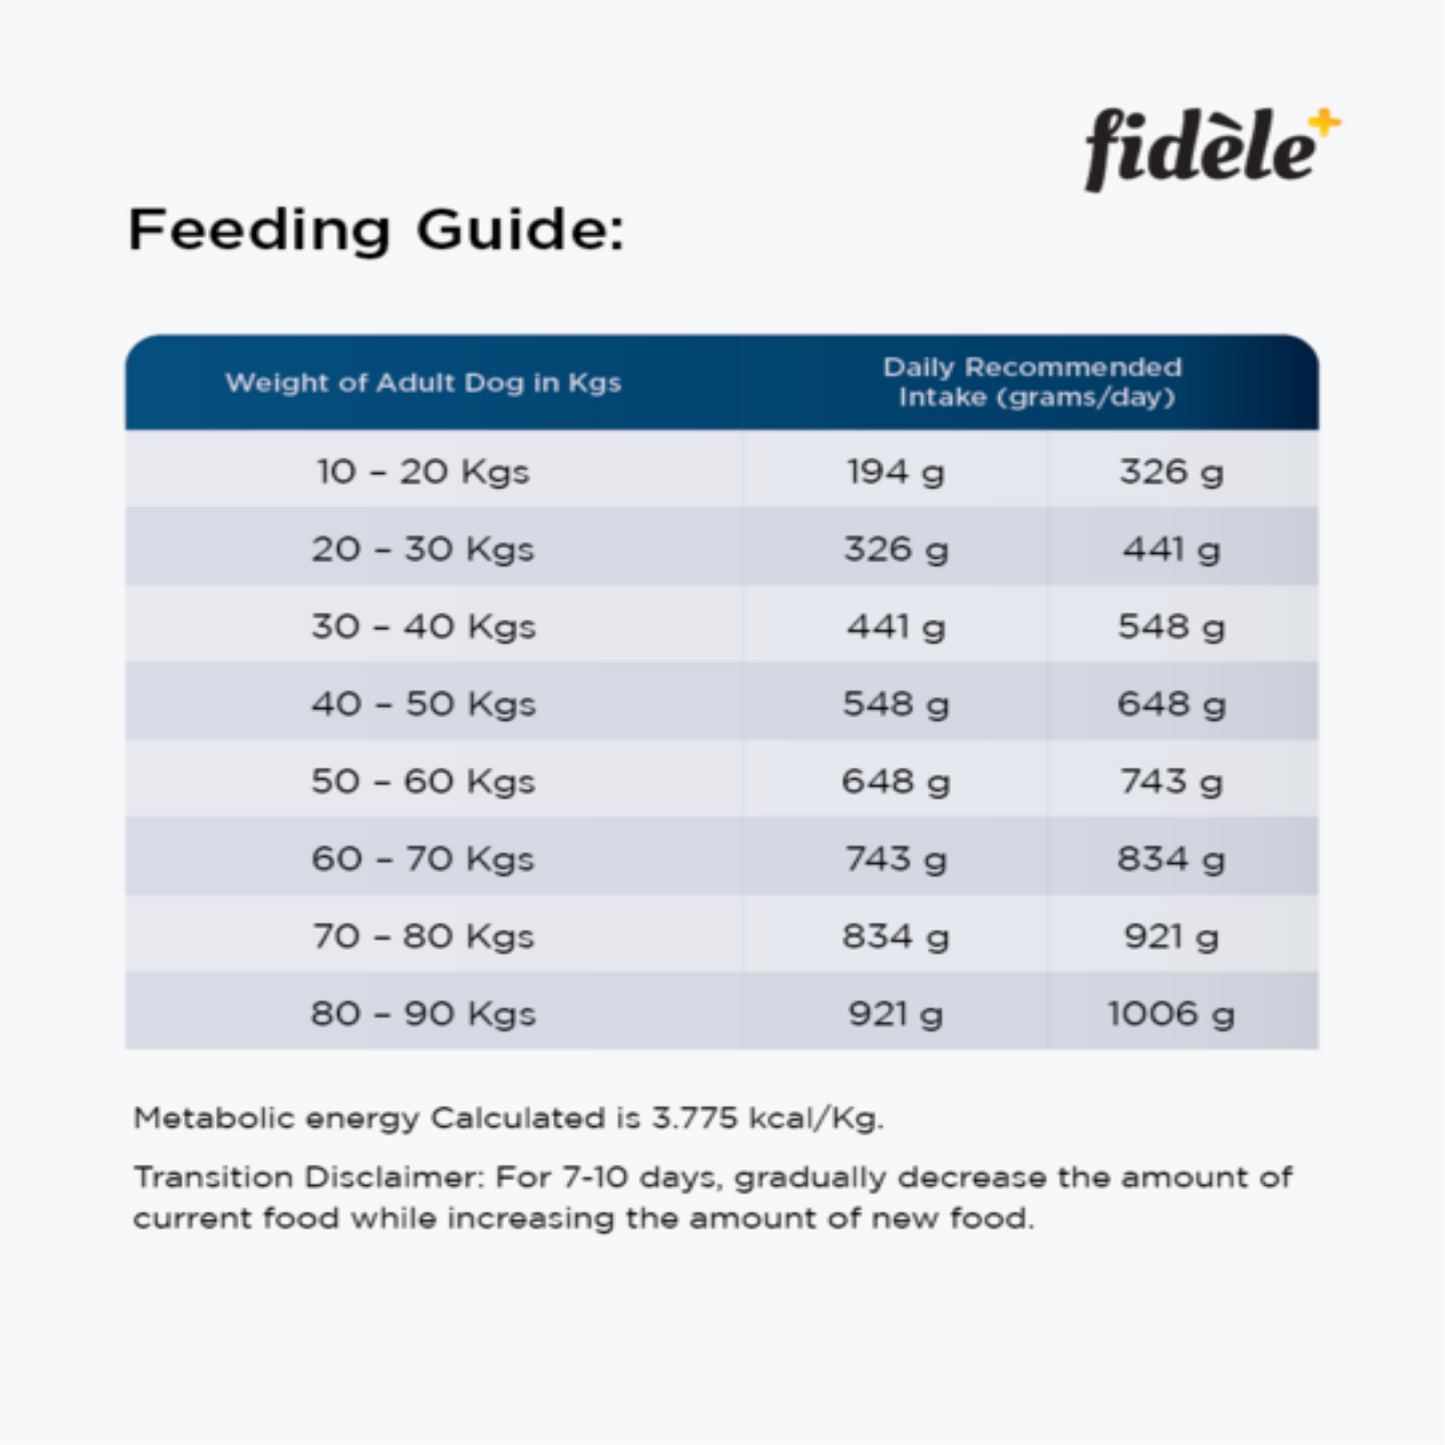 Fidele+ - Adult Large Dry Food For Dogs